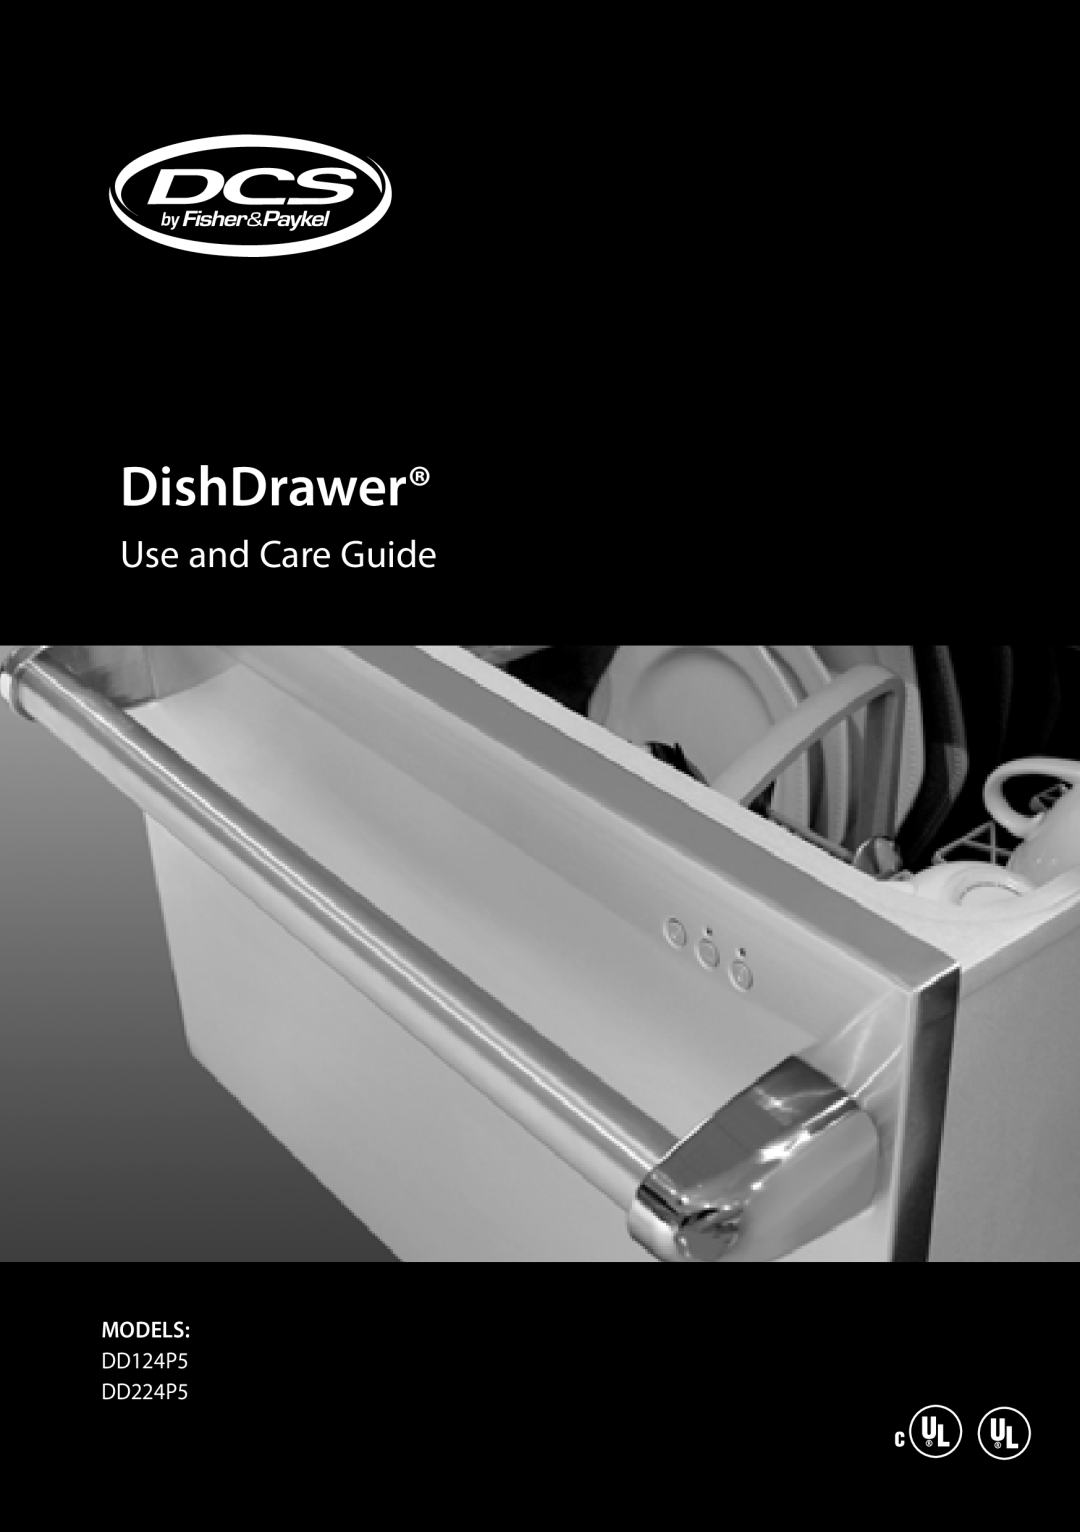 Fisher & Paykel DCS DD224P5, DCS DD124P5 manual DishDrawer, Use and Care Guide, Models 